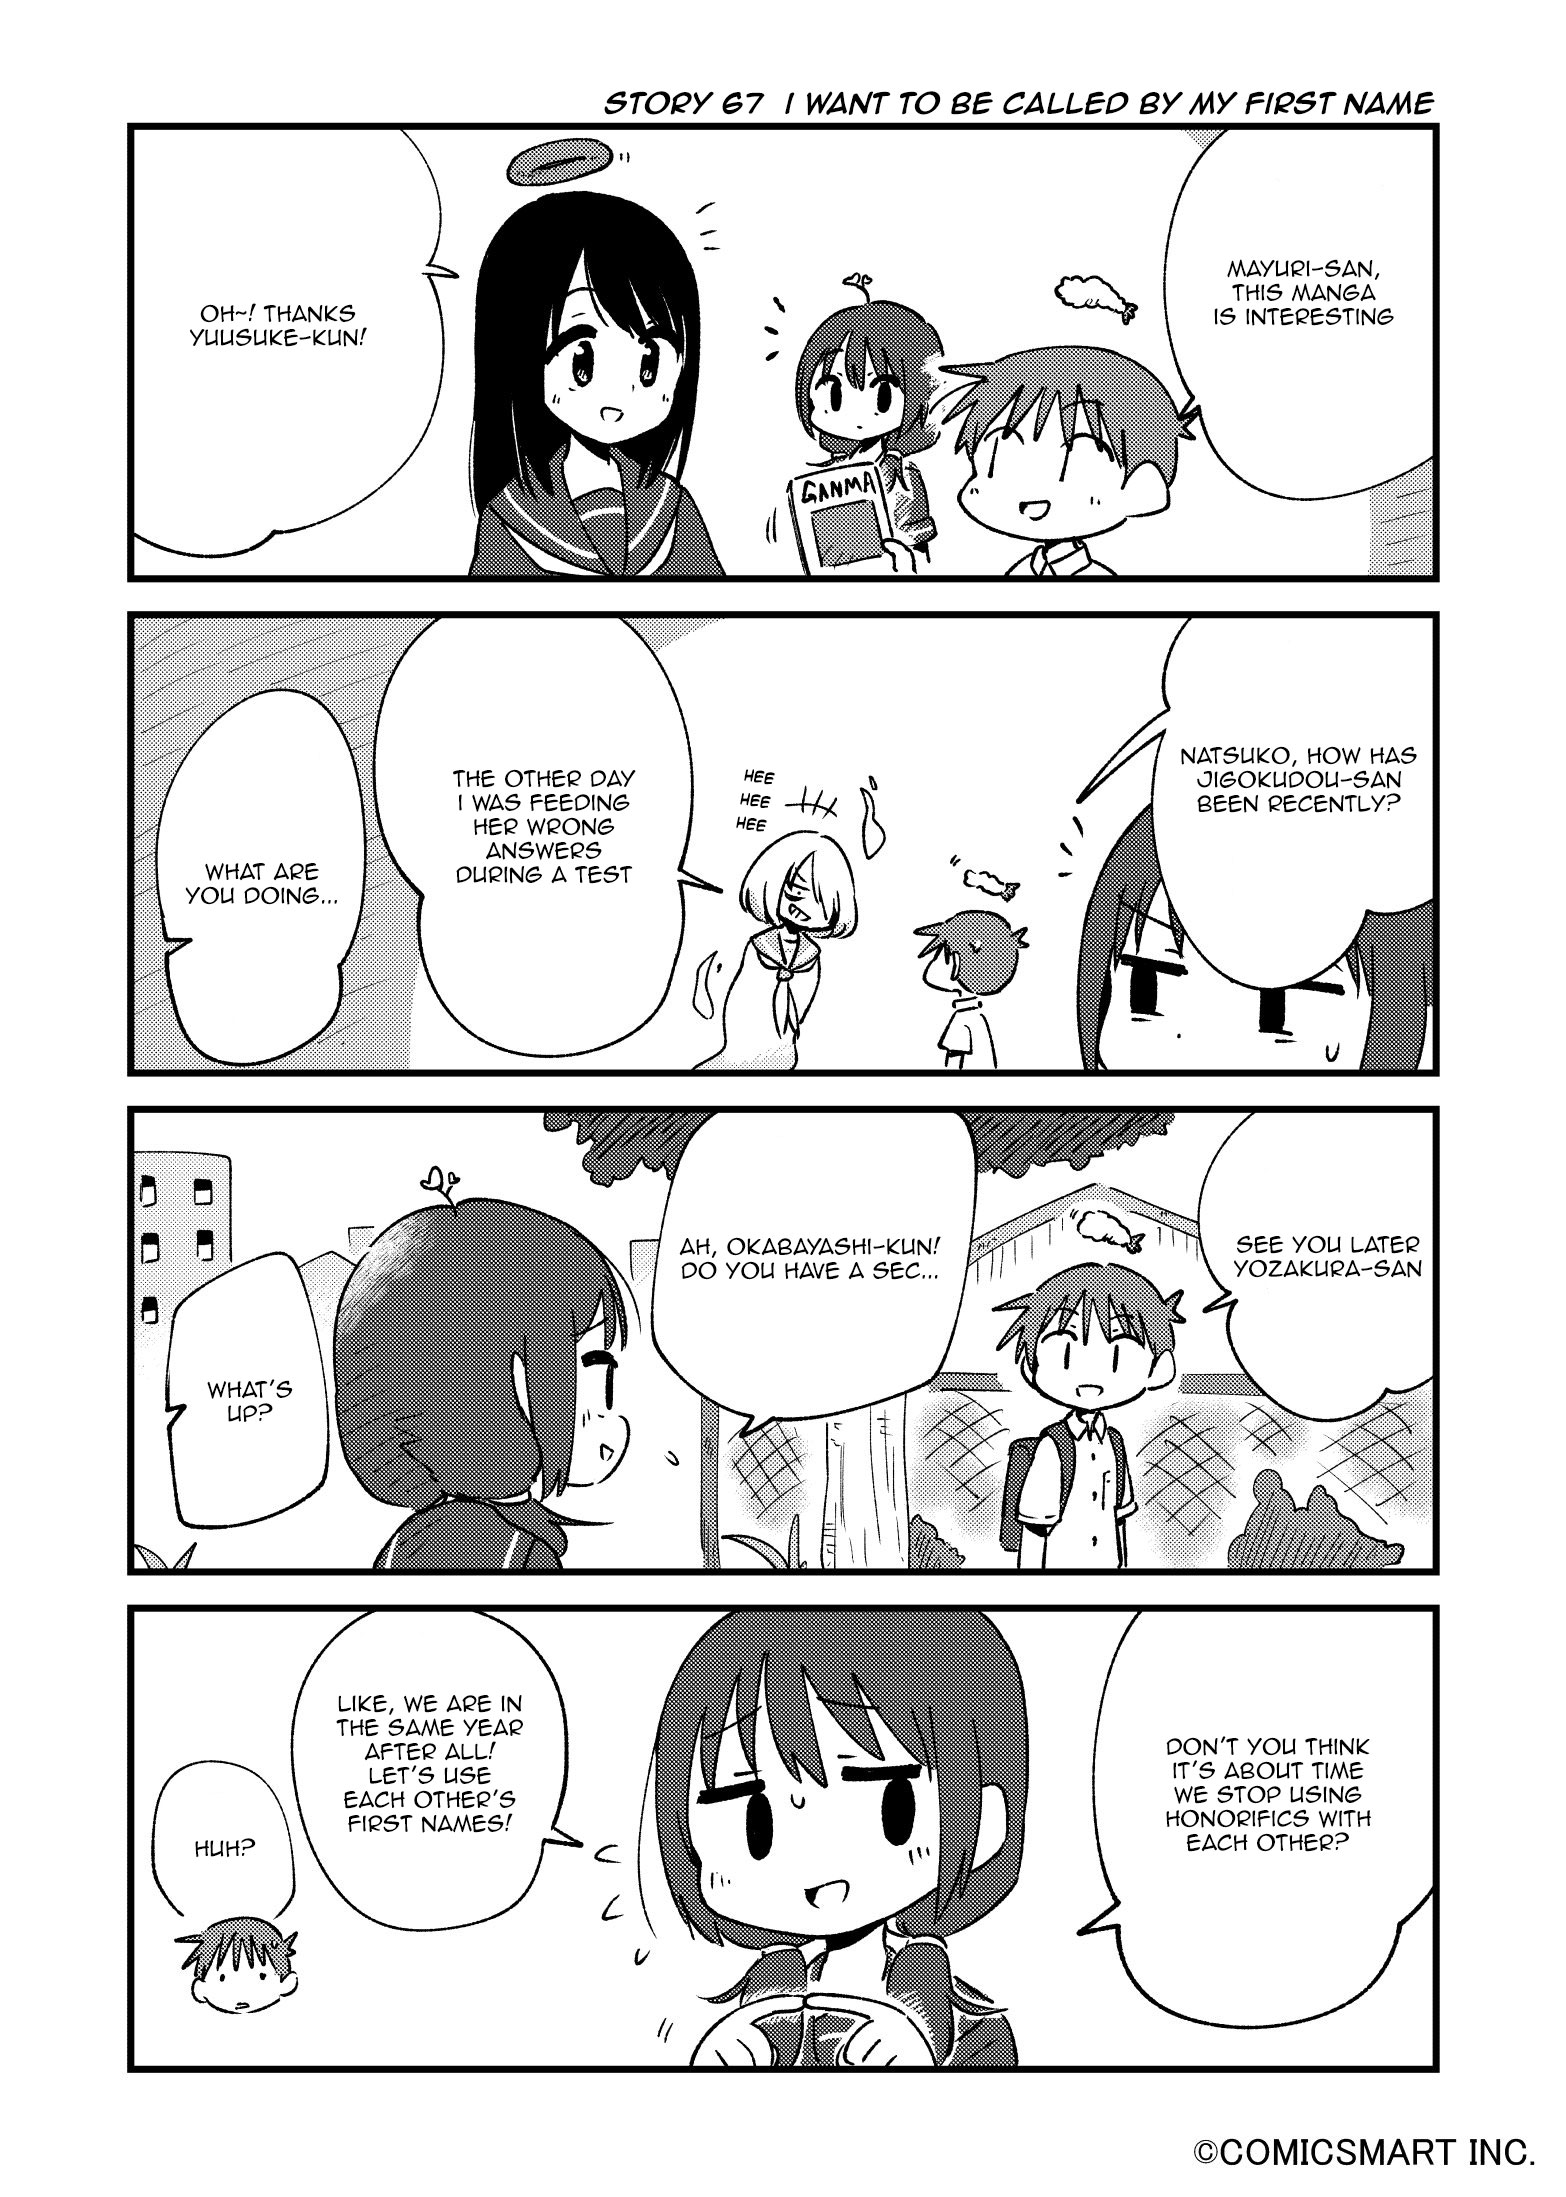 Fushigi No Mayuri-San Chapter 67: I Want To Be Called By My First Name - Picture 1